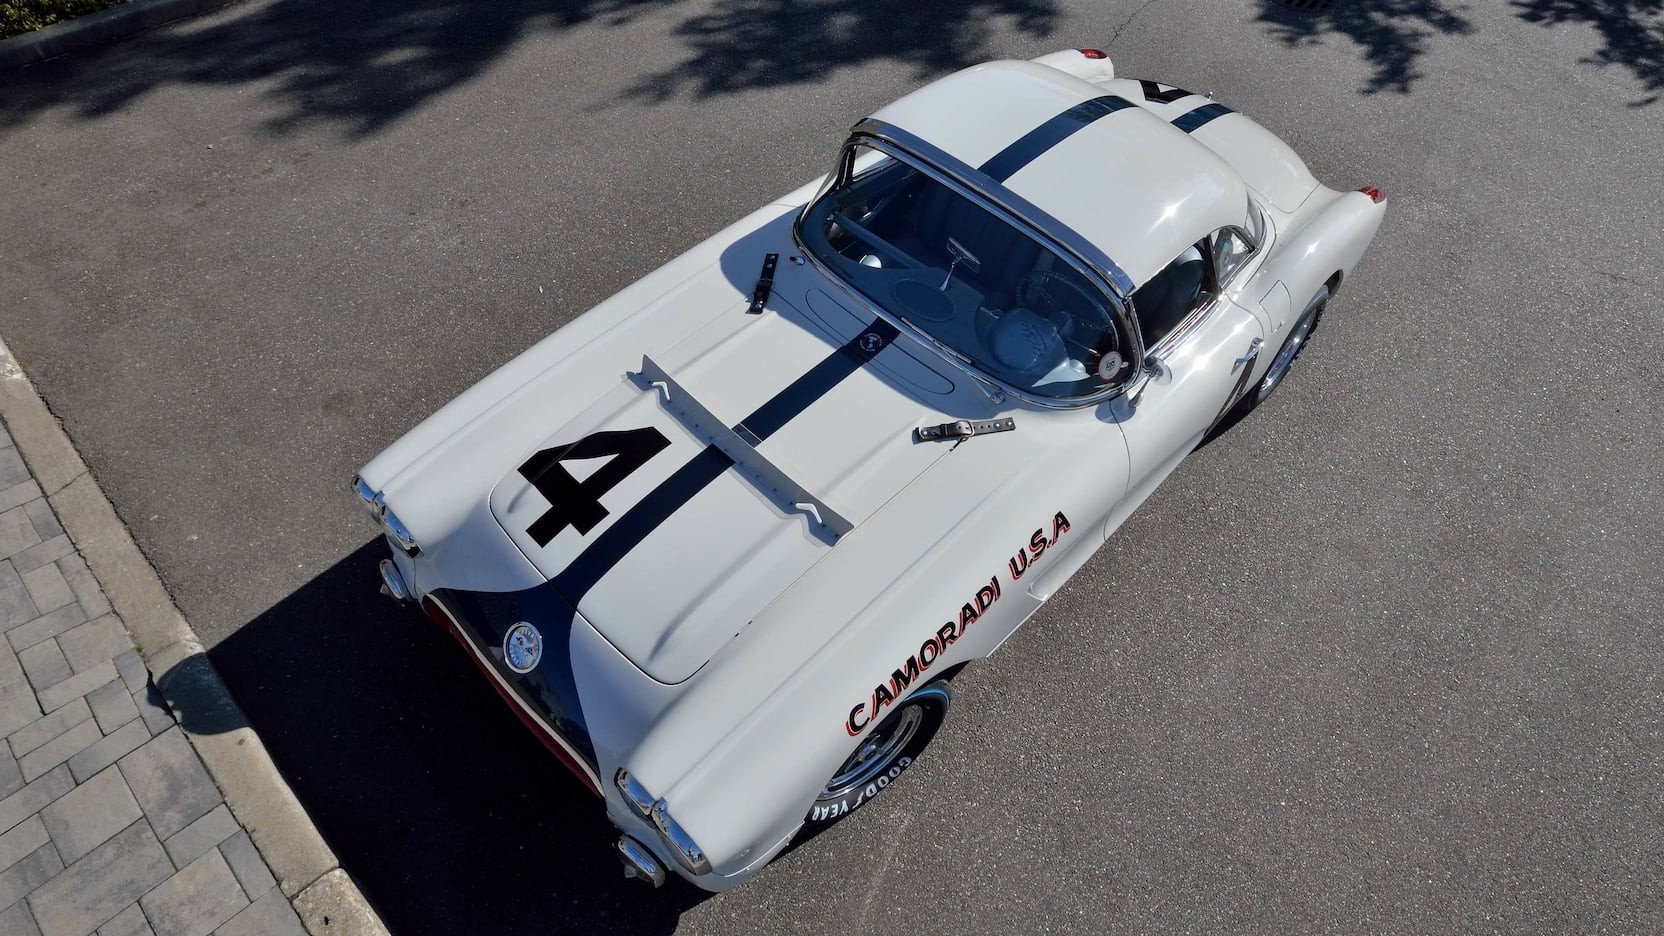 For the First Time in Its History, the Camoradi Le Mans Corvette Offered at Auction